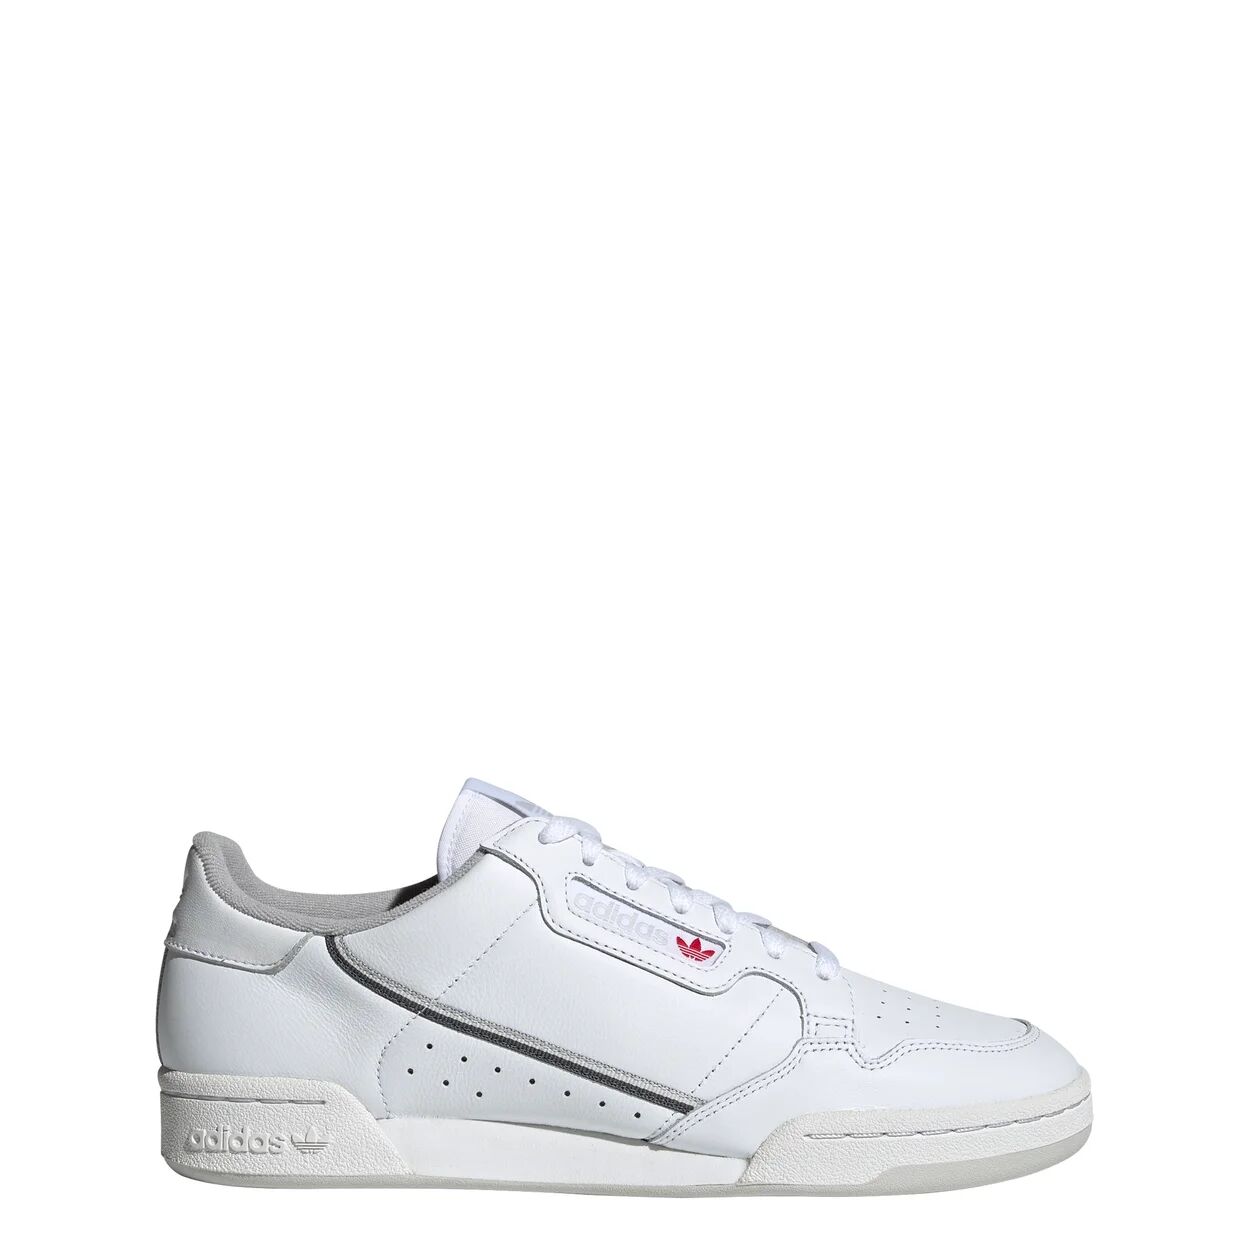 Adidas Sneaker iconica CONTINENTAL80 bianca in pelle con logo laterale